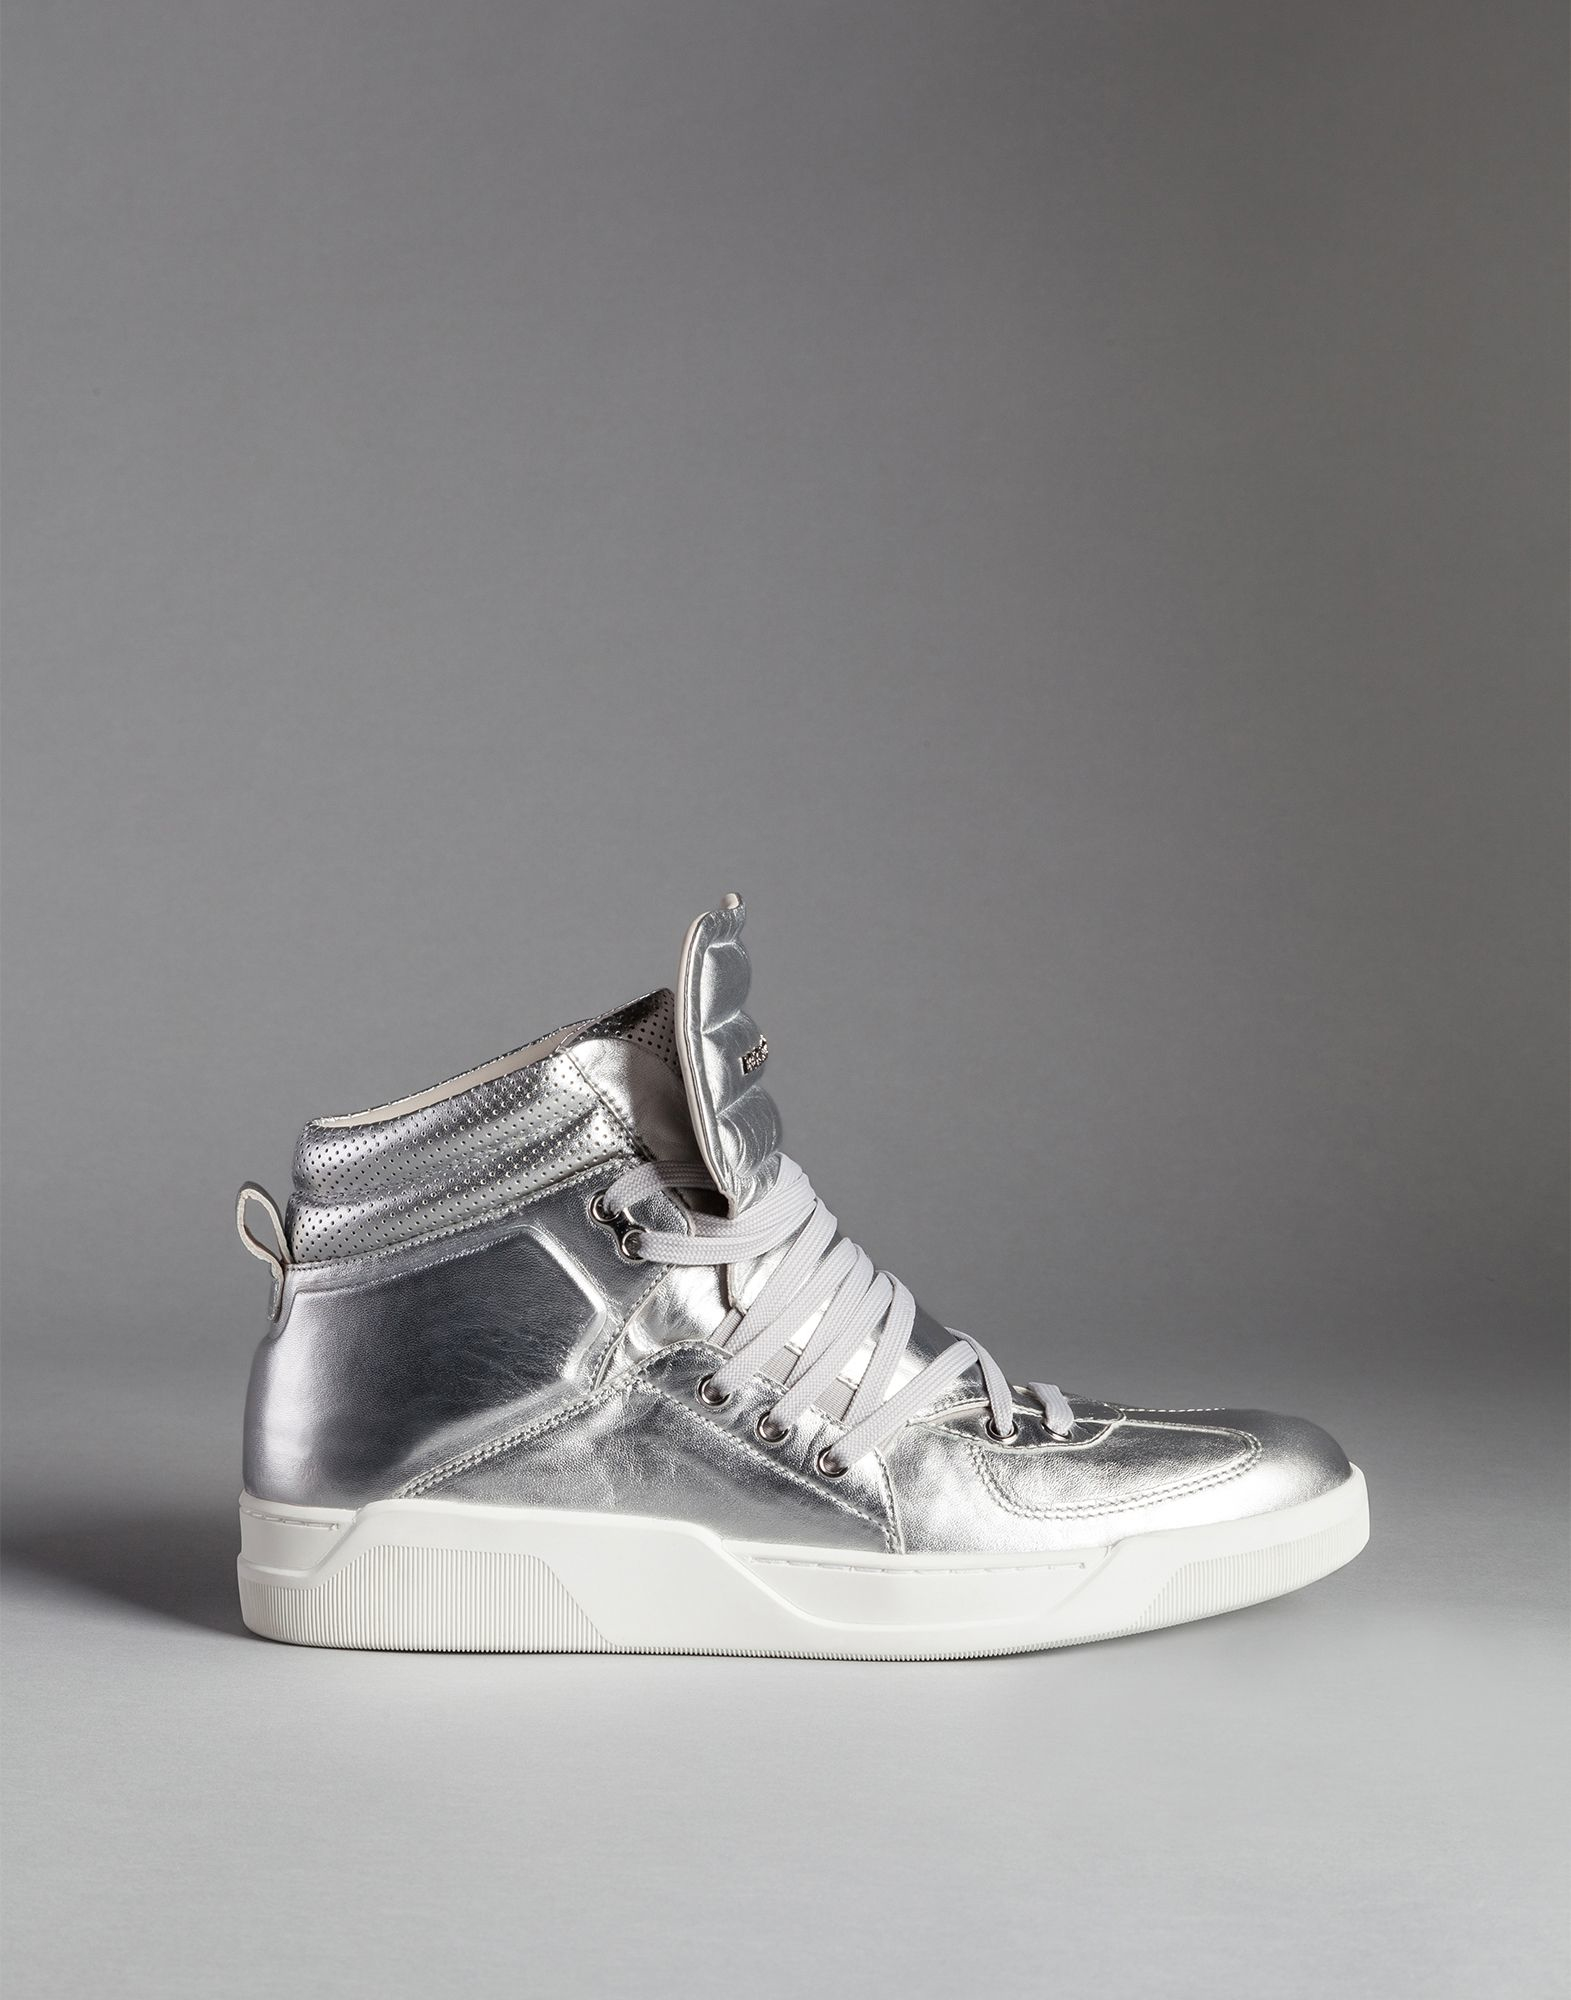 Dolce & Gabbana Laminated High Top Trainers in Silver (Metallic) for Men -  Lyst